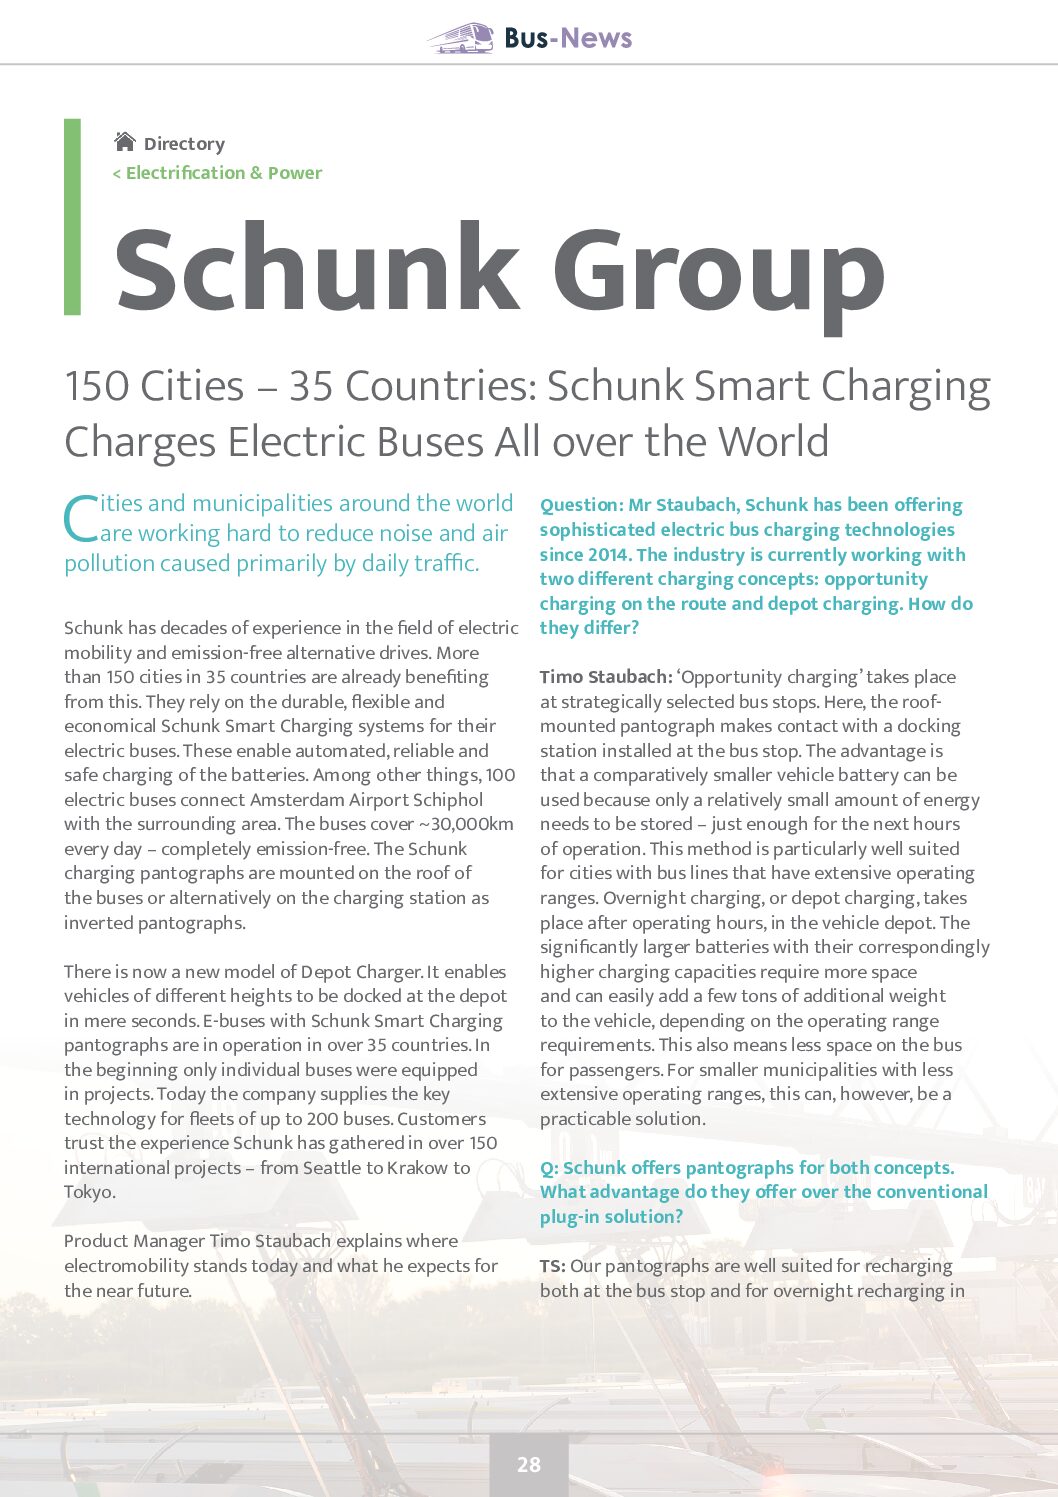 Schunk Smart Charging Charges Electric Buses All over the World